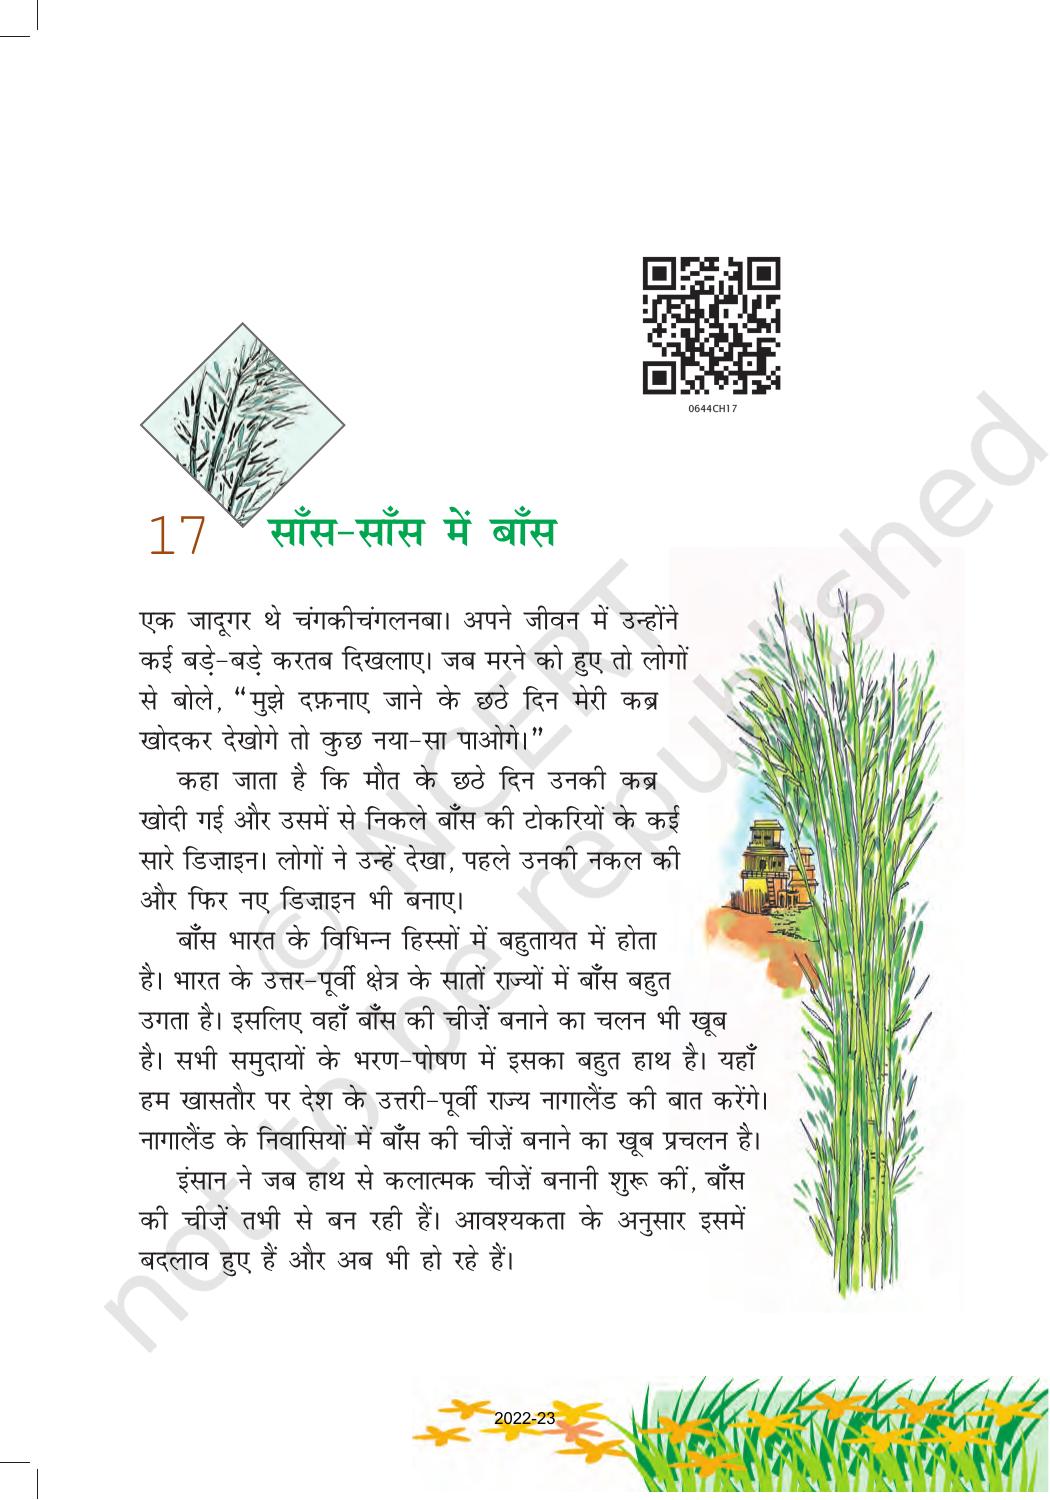 NCERT Book for Class 6 Hindi(Vasant Bhag 1) : Chapter 17-साँस – साँस में बांस - Page 1